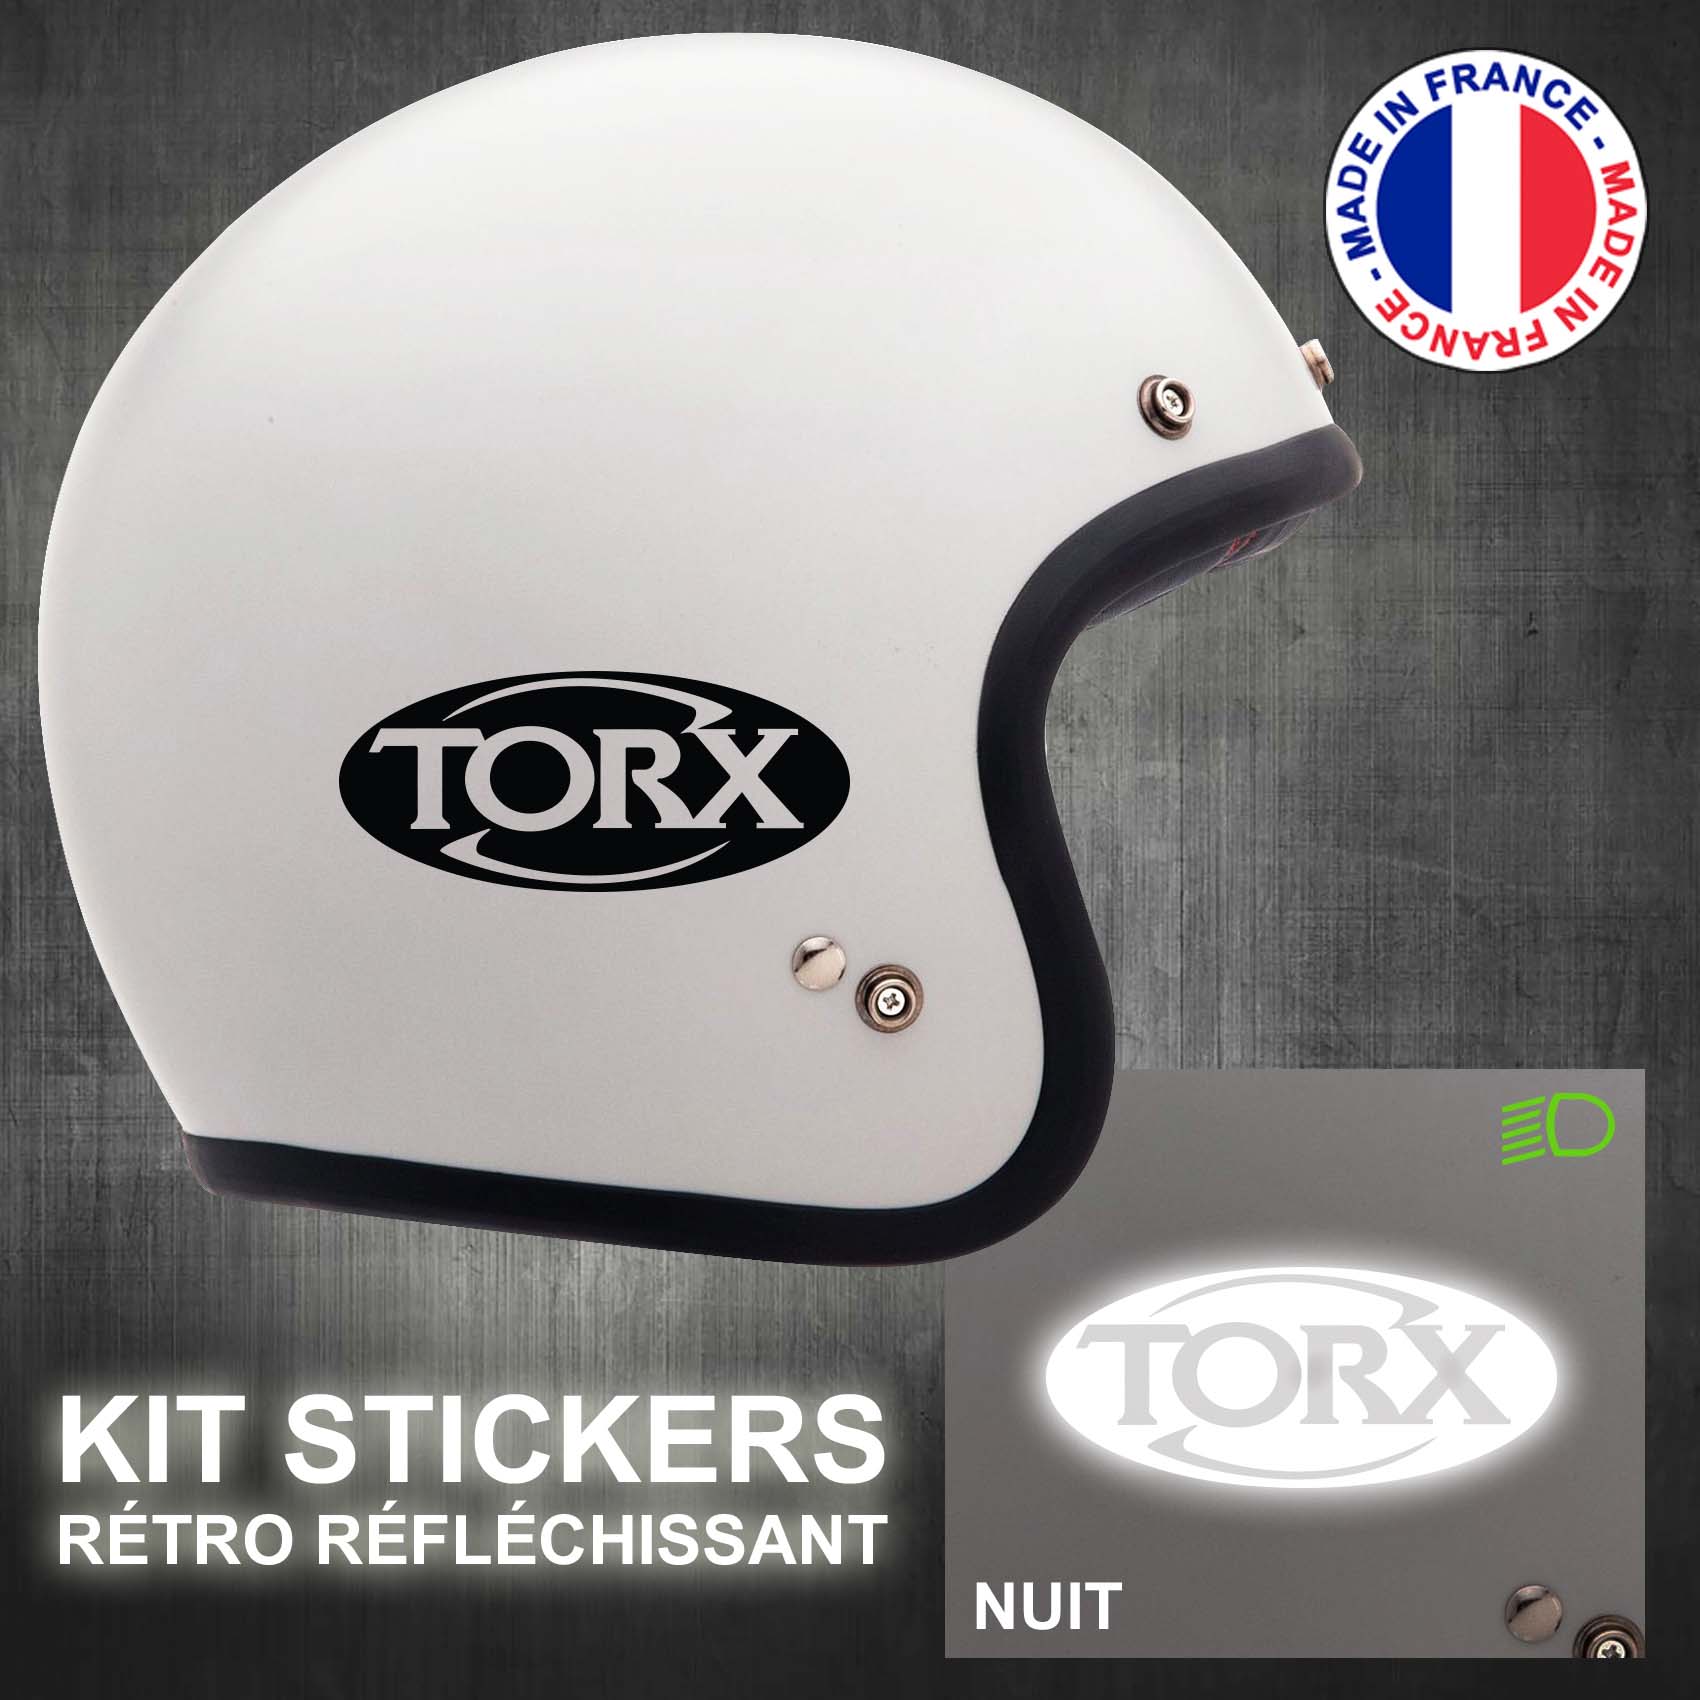 stickers-casque-moto-torx-ref1-retro-reflechissant-autocollant-blanc-moto-velo-tuning-racing-route-sticker-casques-adhesif-scooter-nuit-securite-decals-personnalise-personnalisable-min